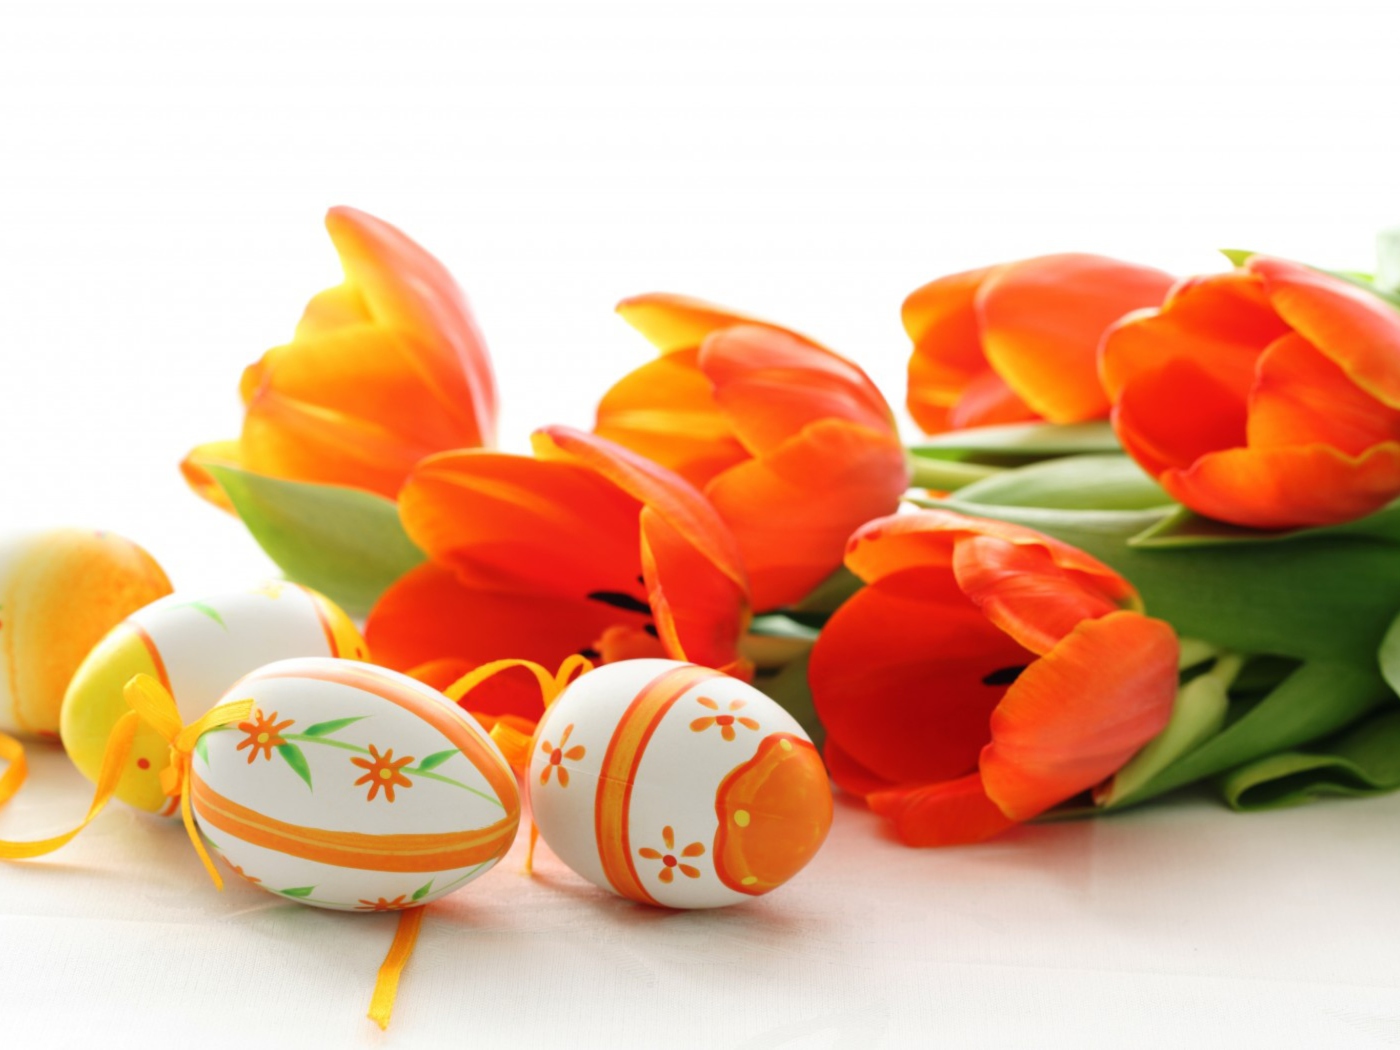 Eggs And Tulips wallpaper 1400x1050